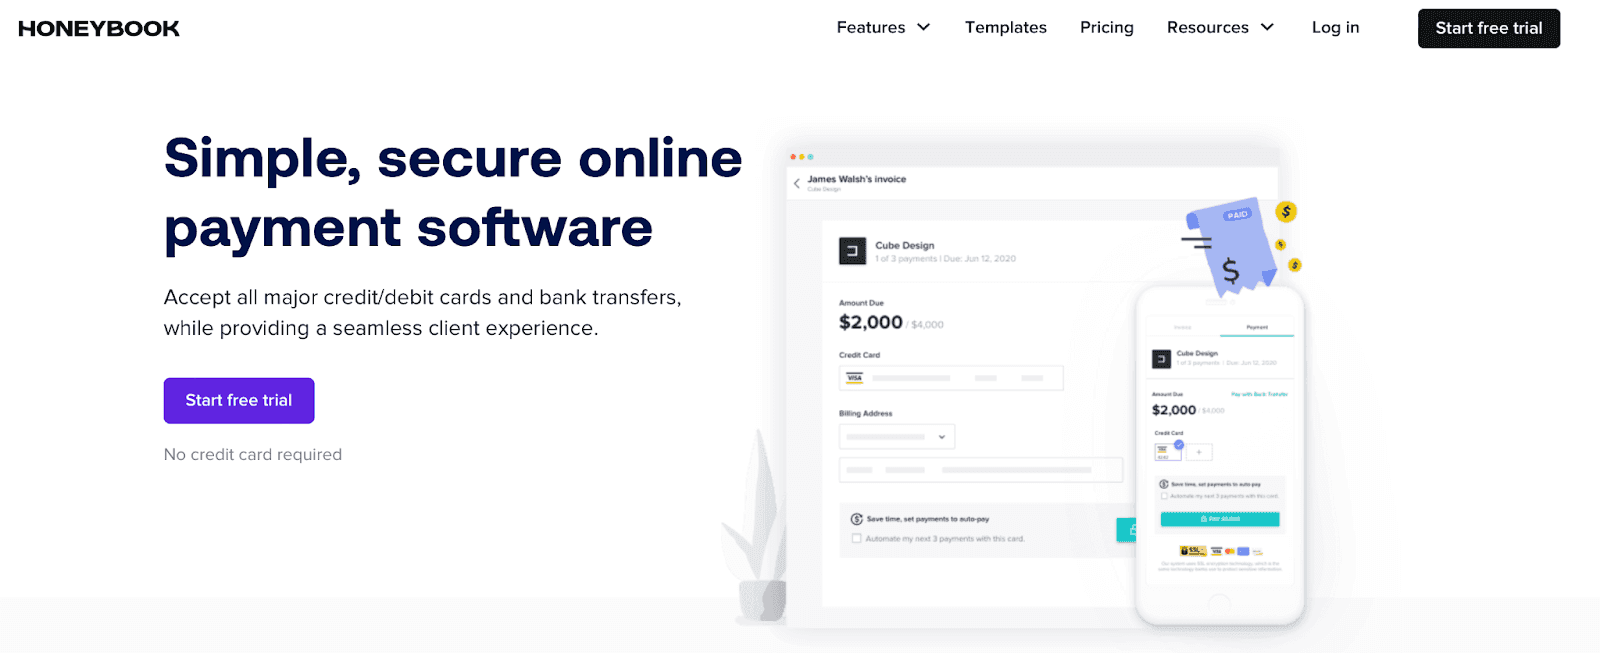 Honeybook - Simple, secure online payment software (Start free trial)